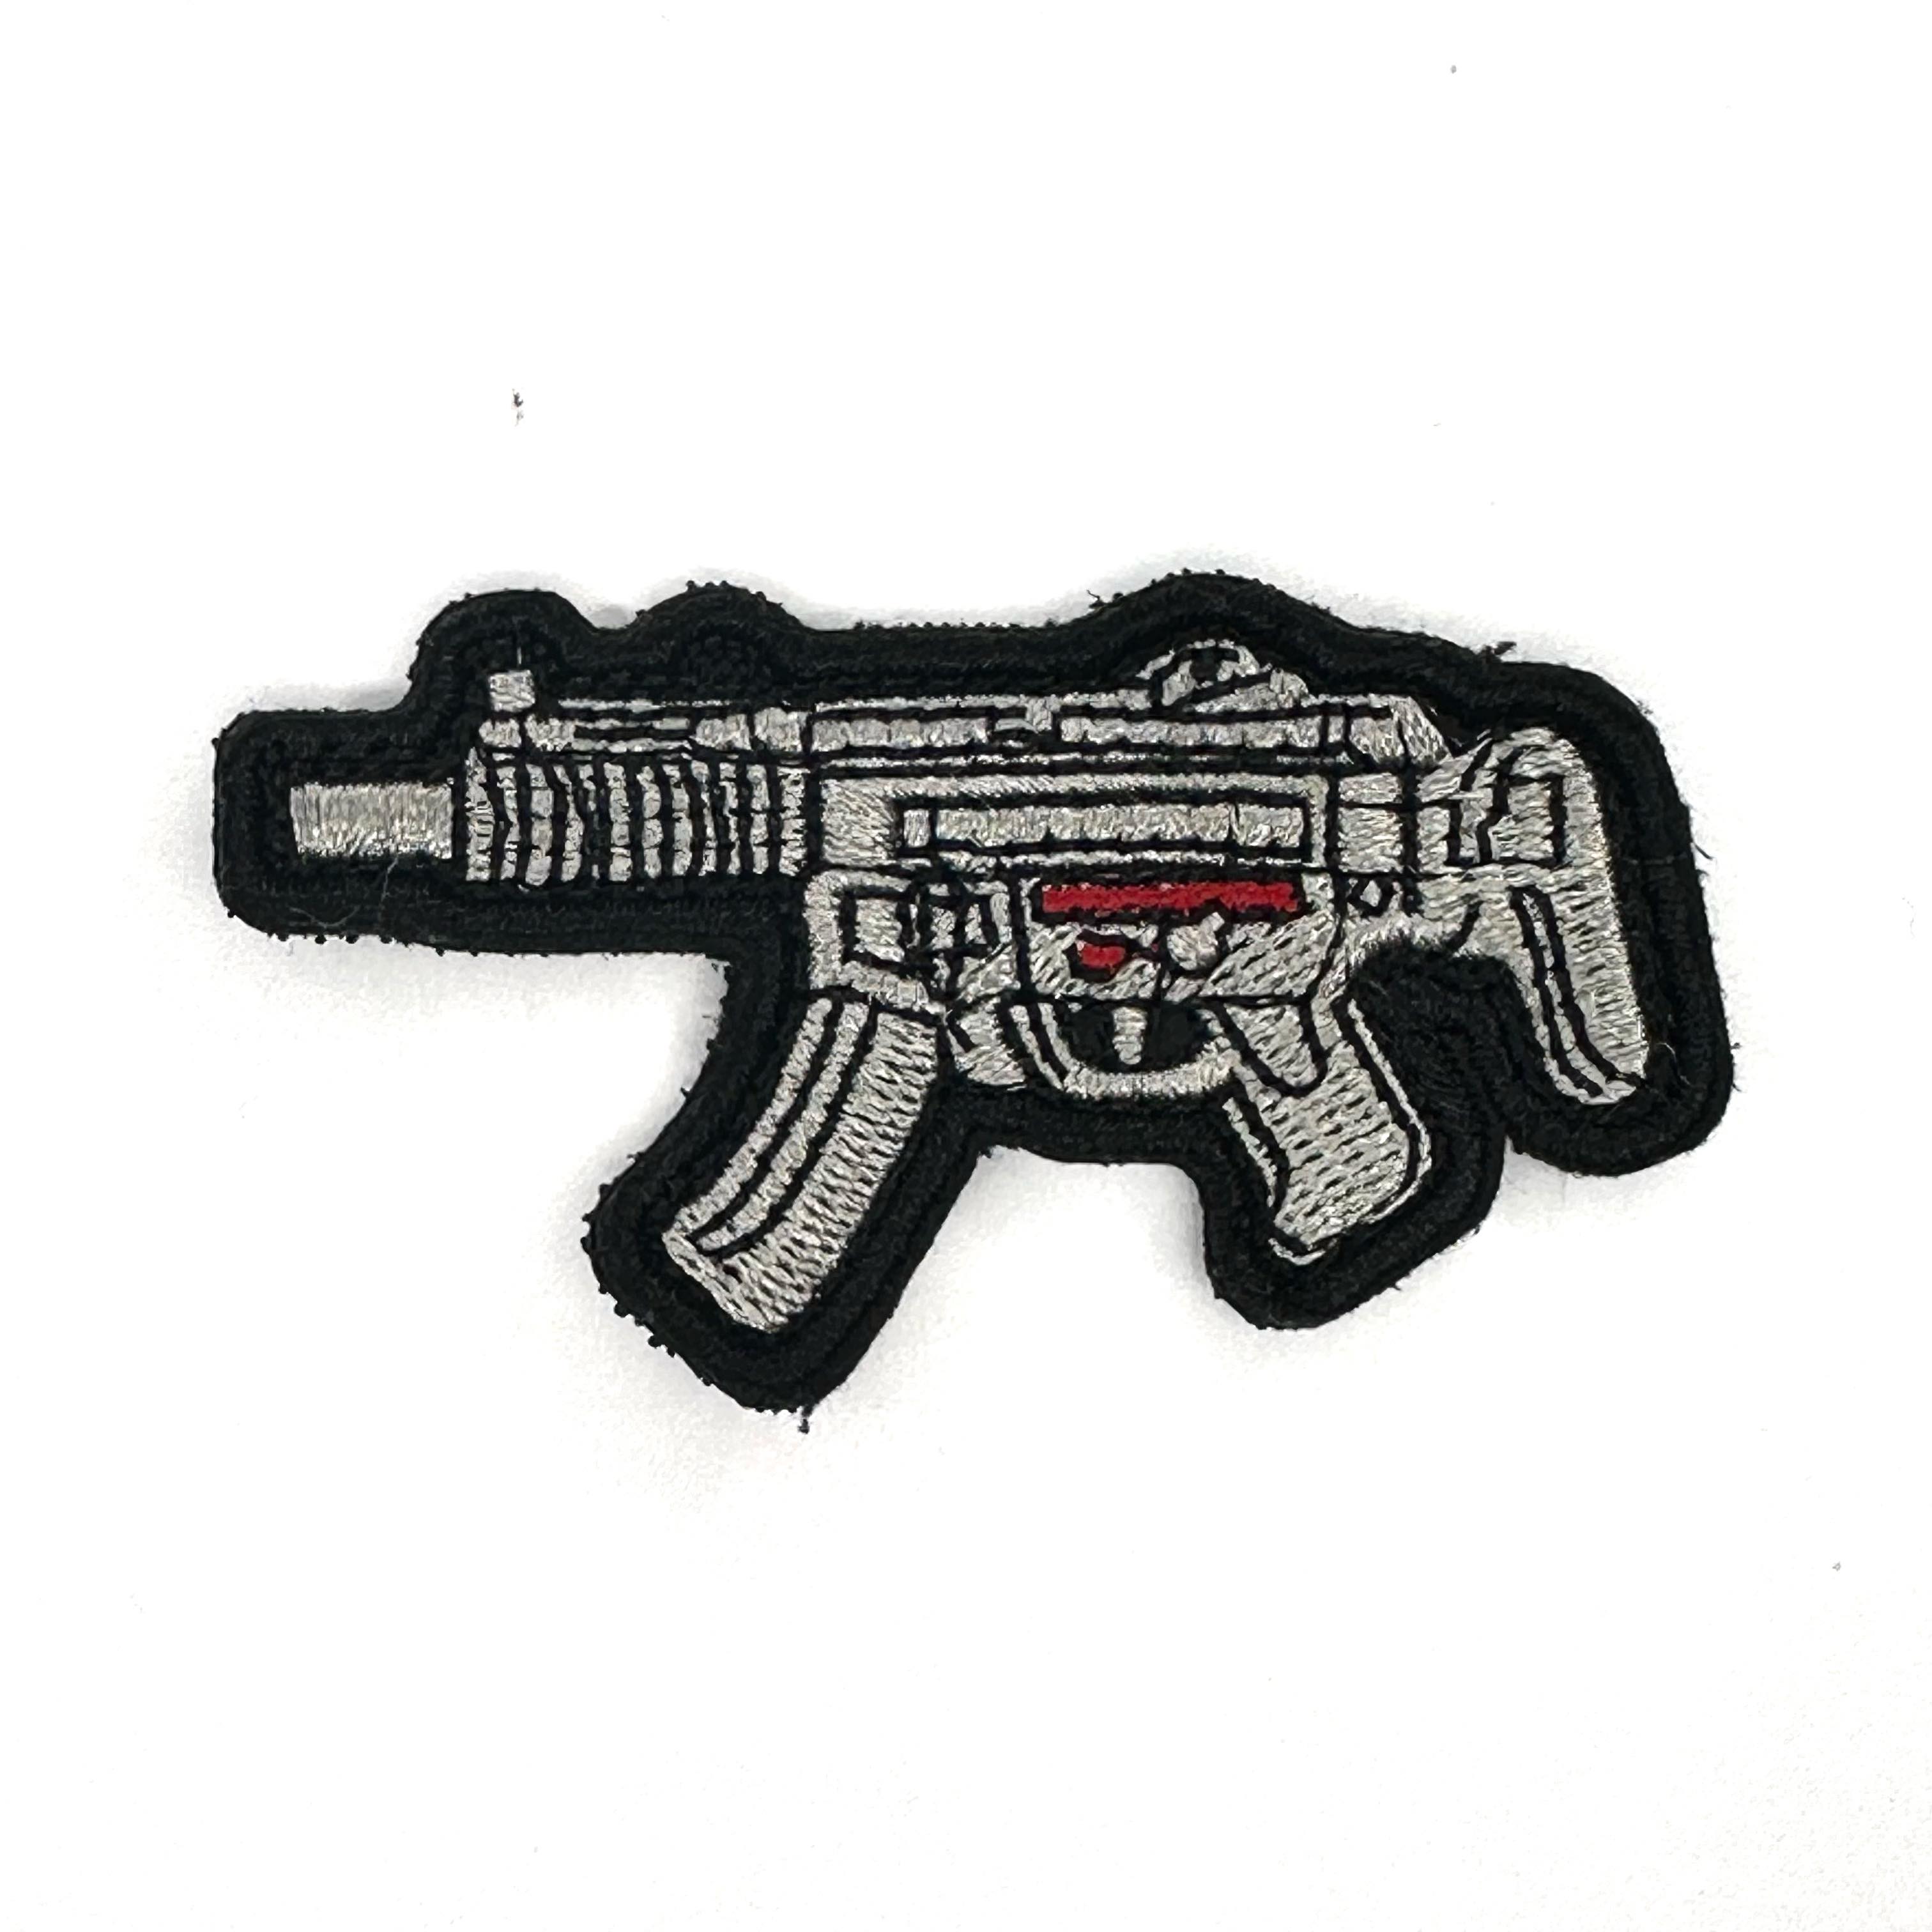 Embroidery Patch - Gun MP5A4